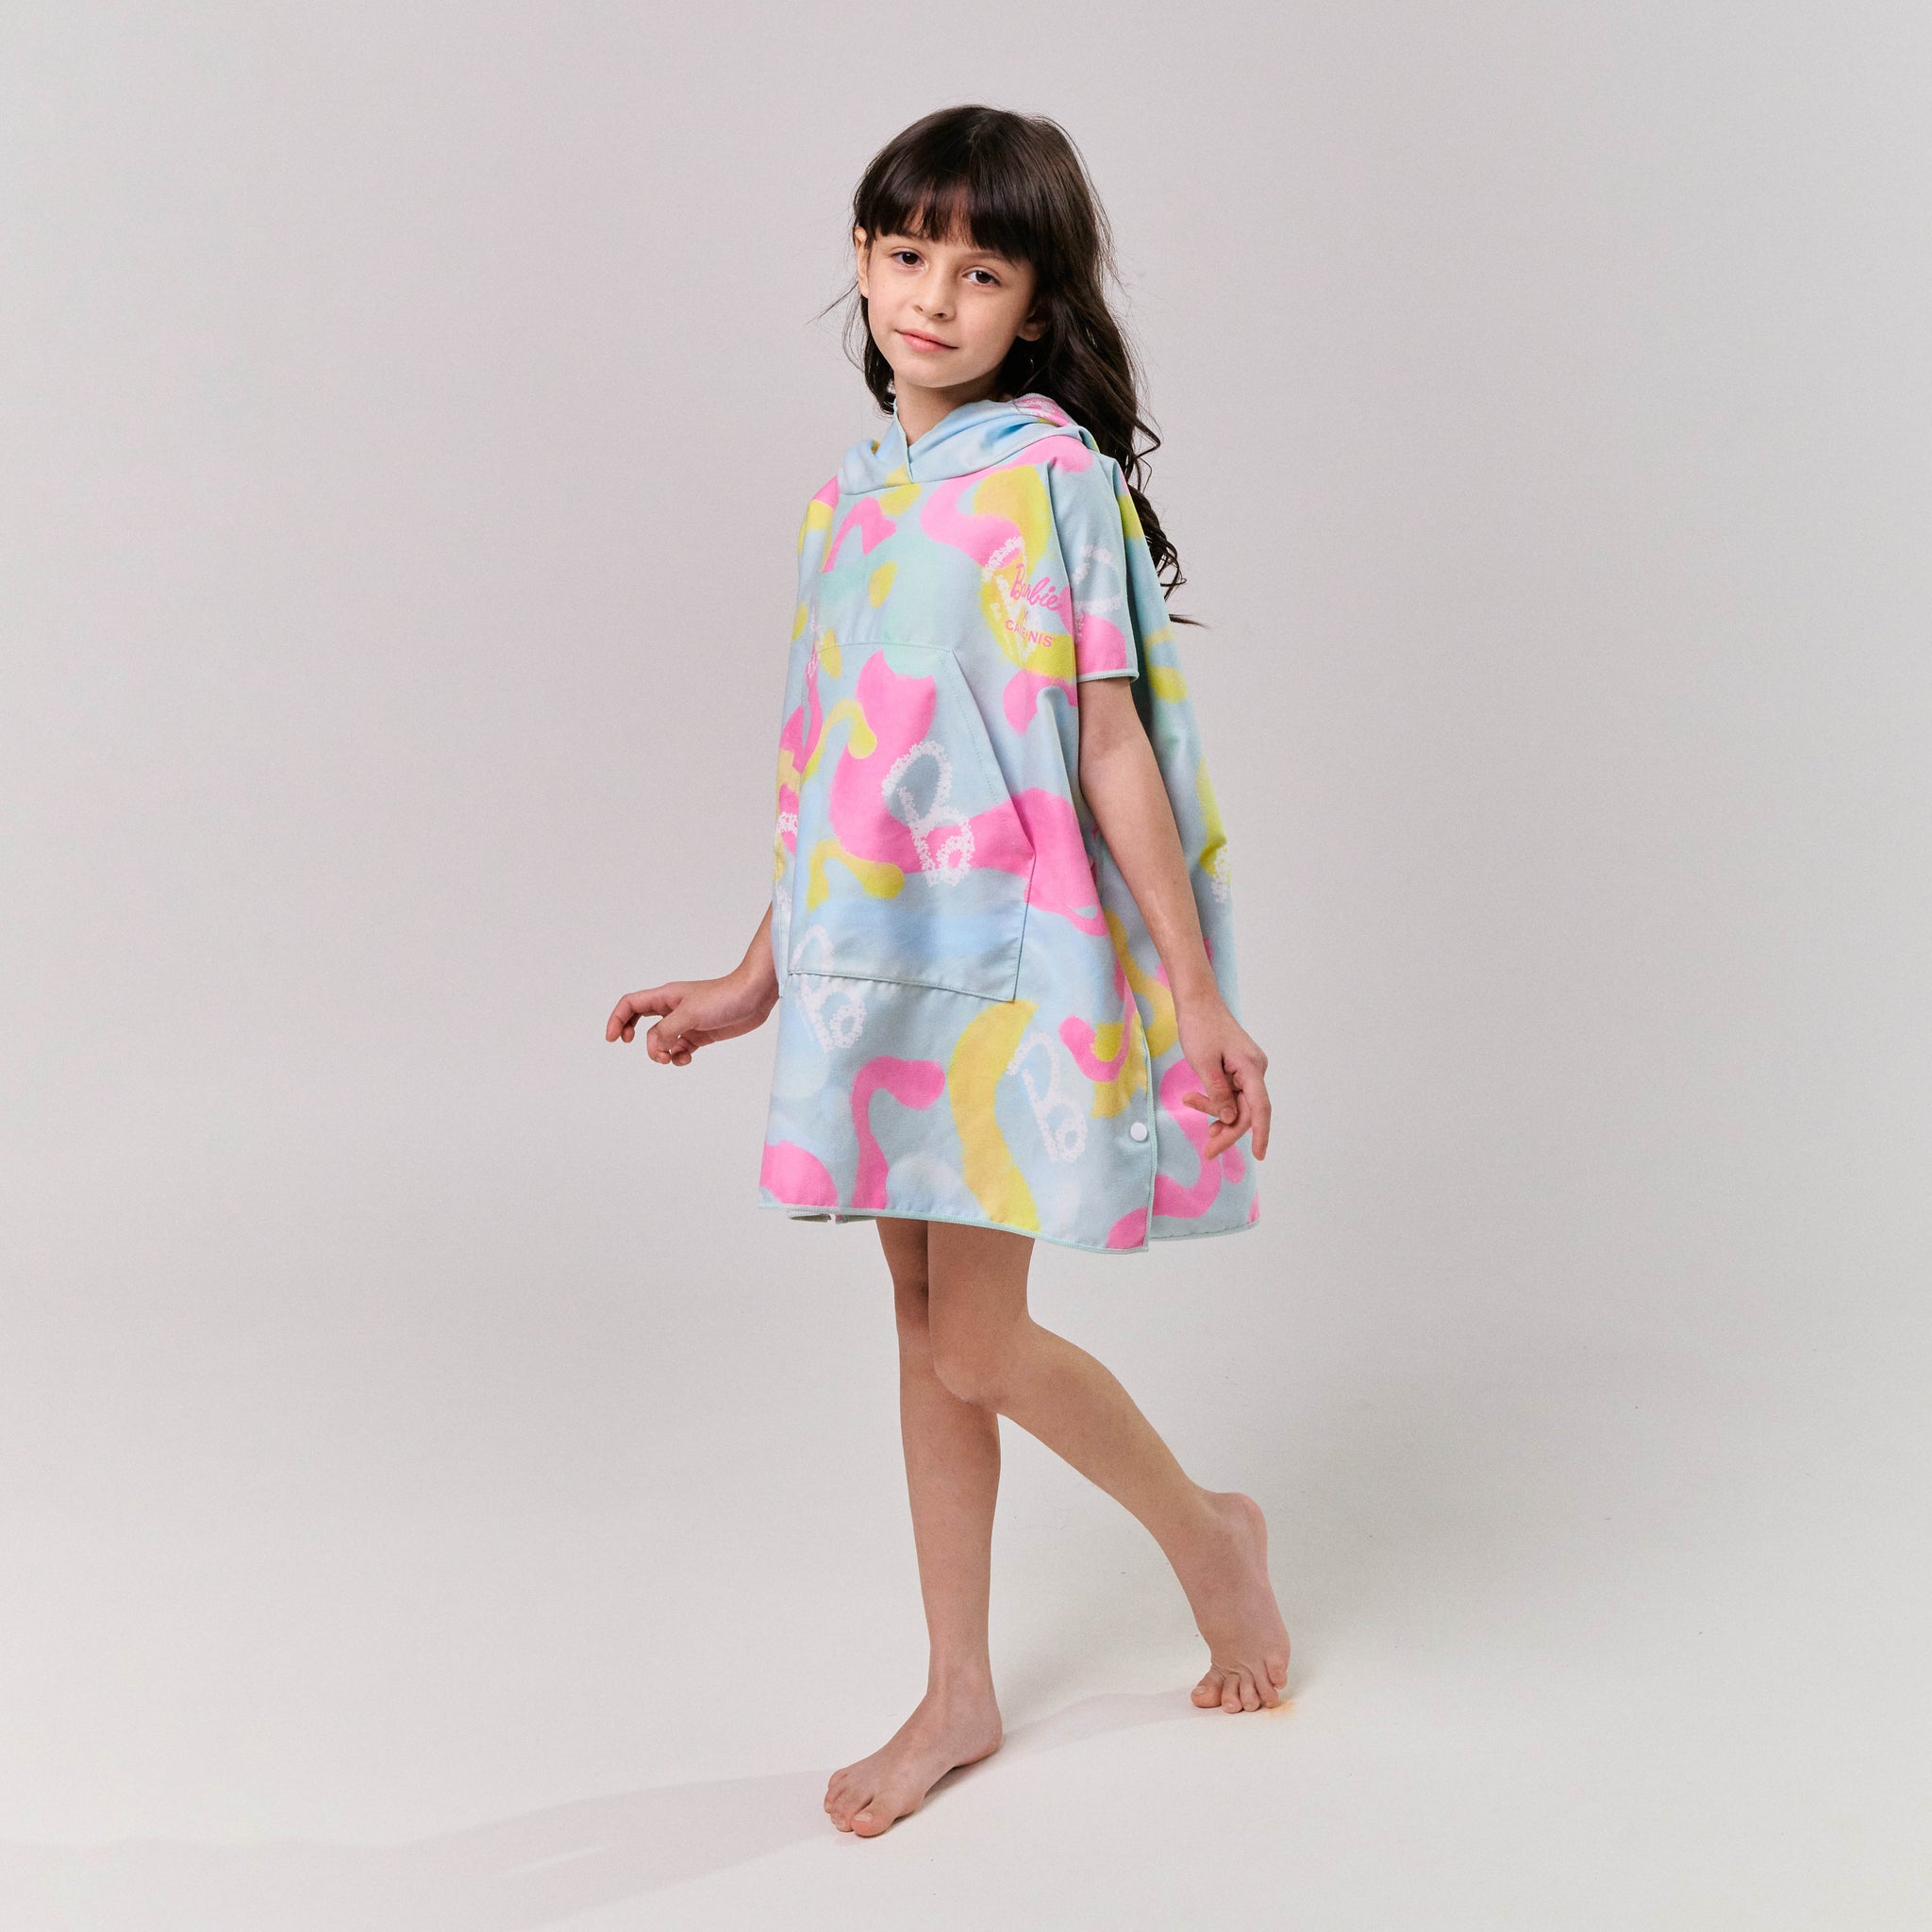 PONCHO KIDS TOWEL MELODY IN BLUE PINK